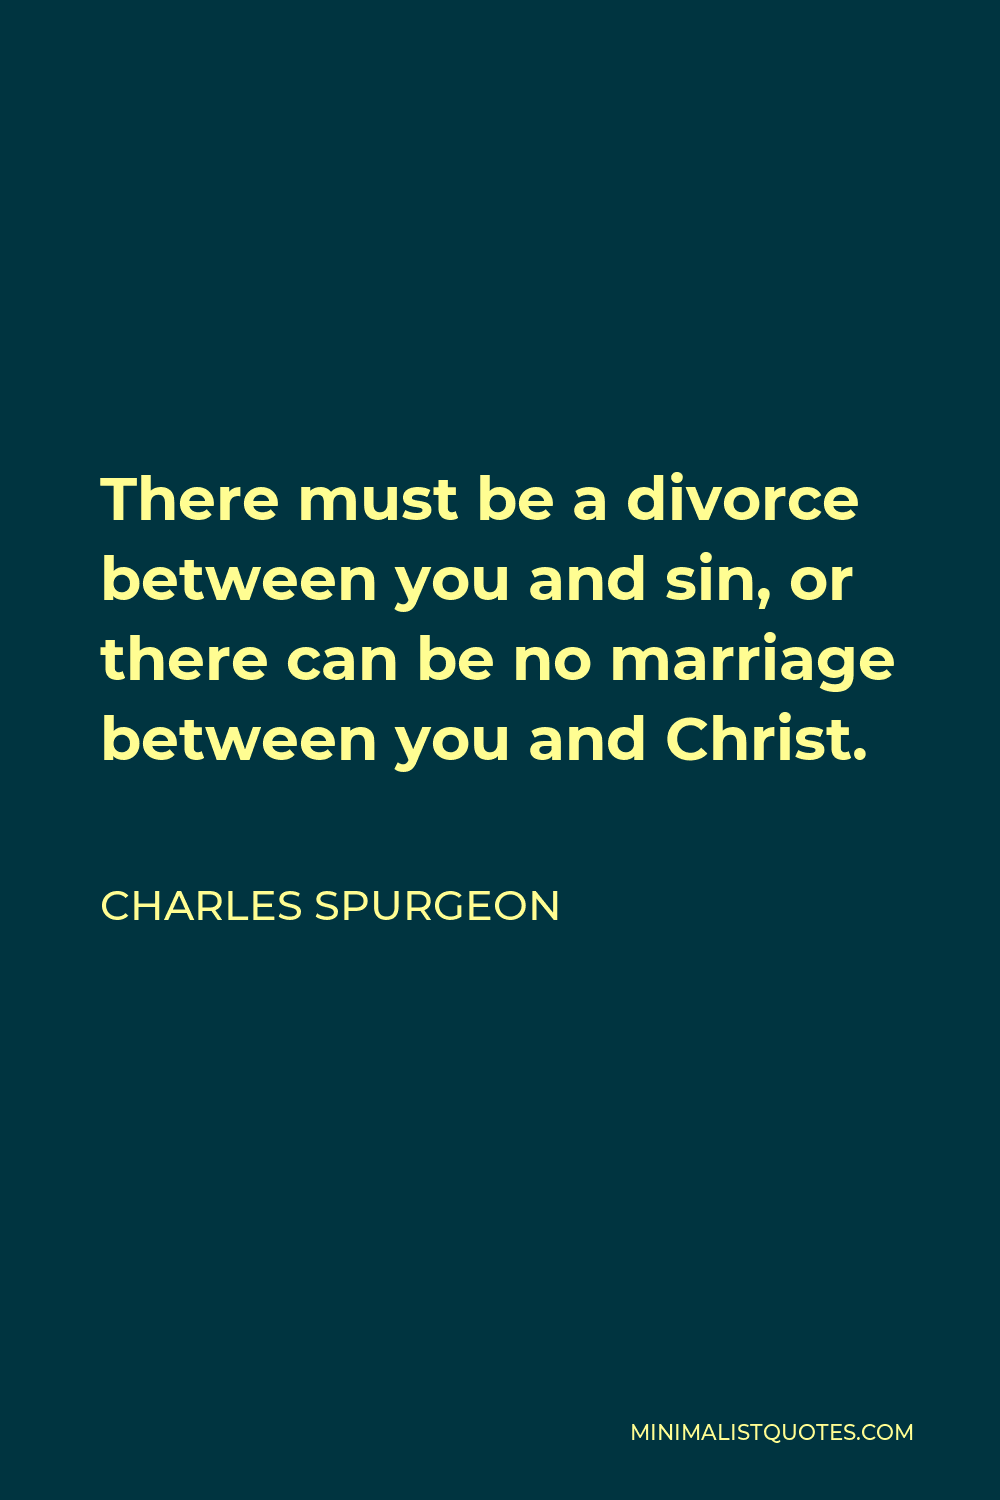 Charles Spurgeon Quote - There must be a divorce between you and sin, or there can be no marriage between you and Christ.